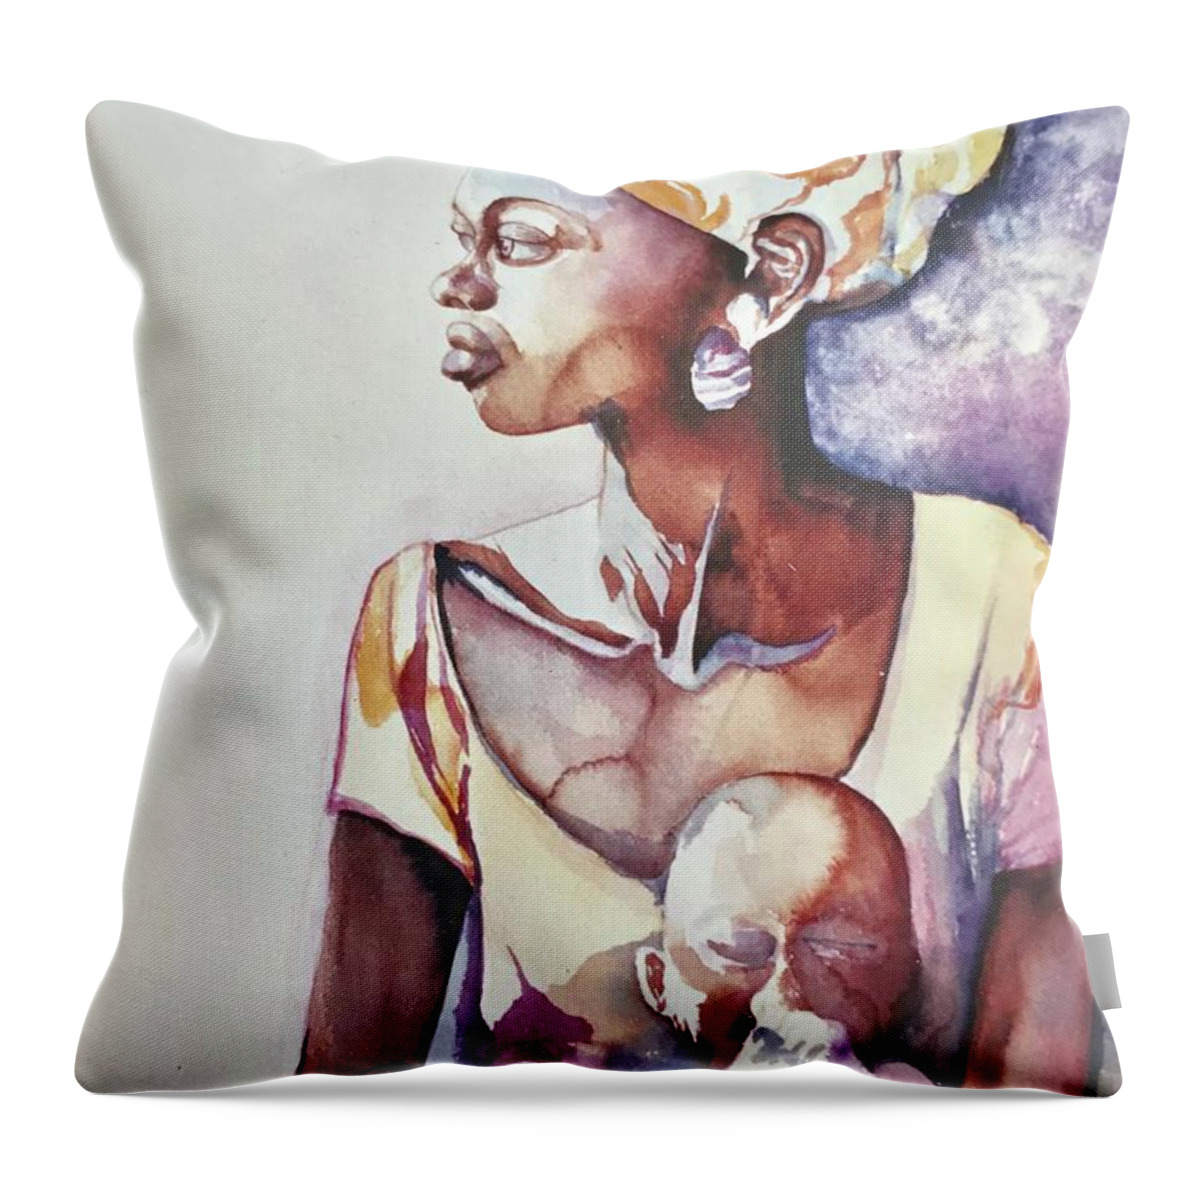 #africian #africianwoman #mother #child #africa #woman #serrialeone #watercolor #watercolorpainting #glenneff #thesoundpoetsmusic #picturerockstudio Www.glenneff.com Throw Pillow featuring the painting African Woman by Glen Neff